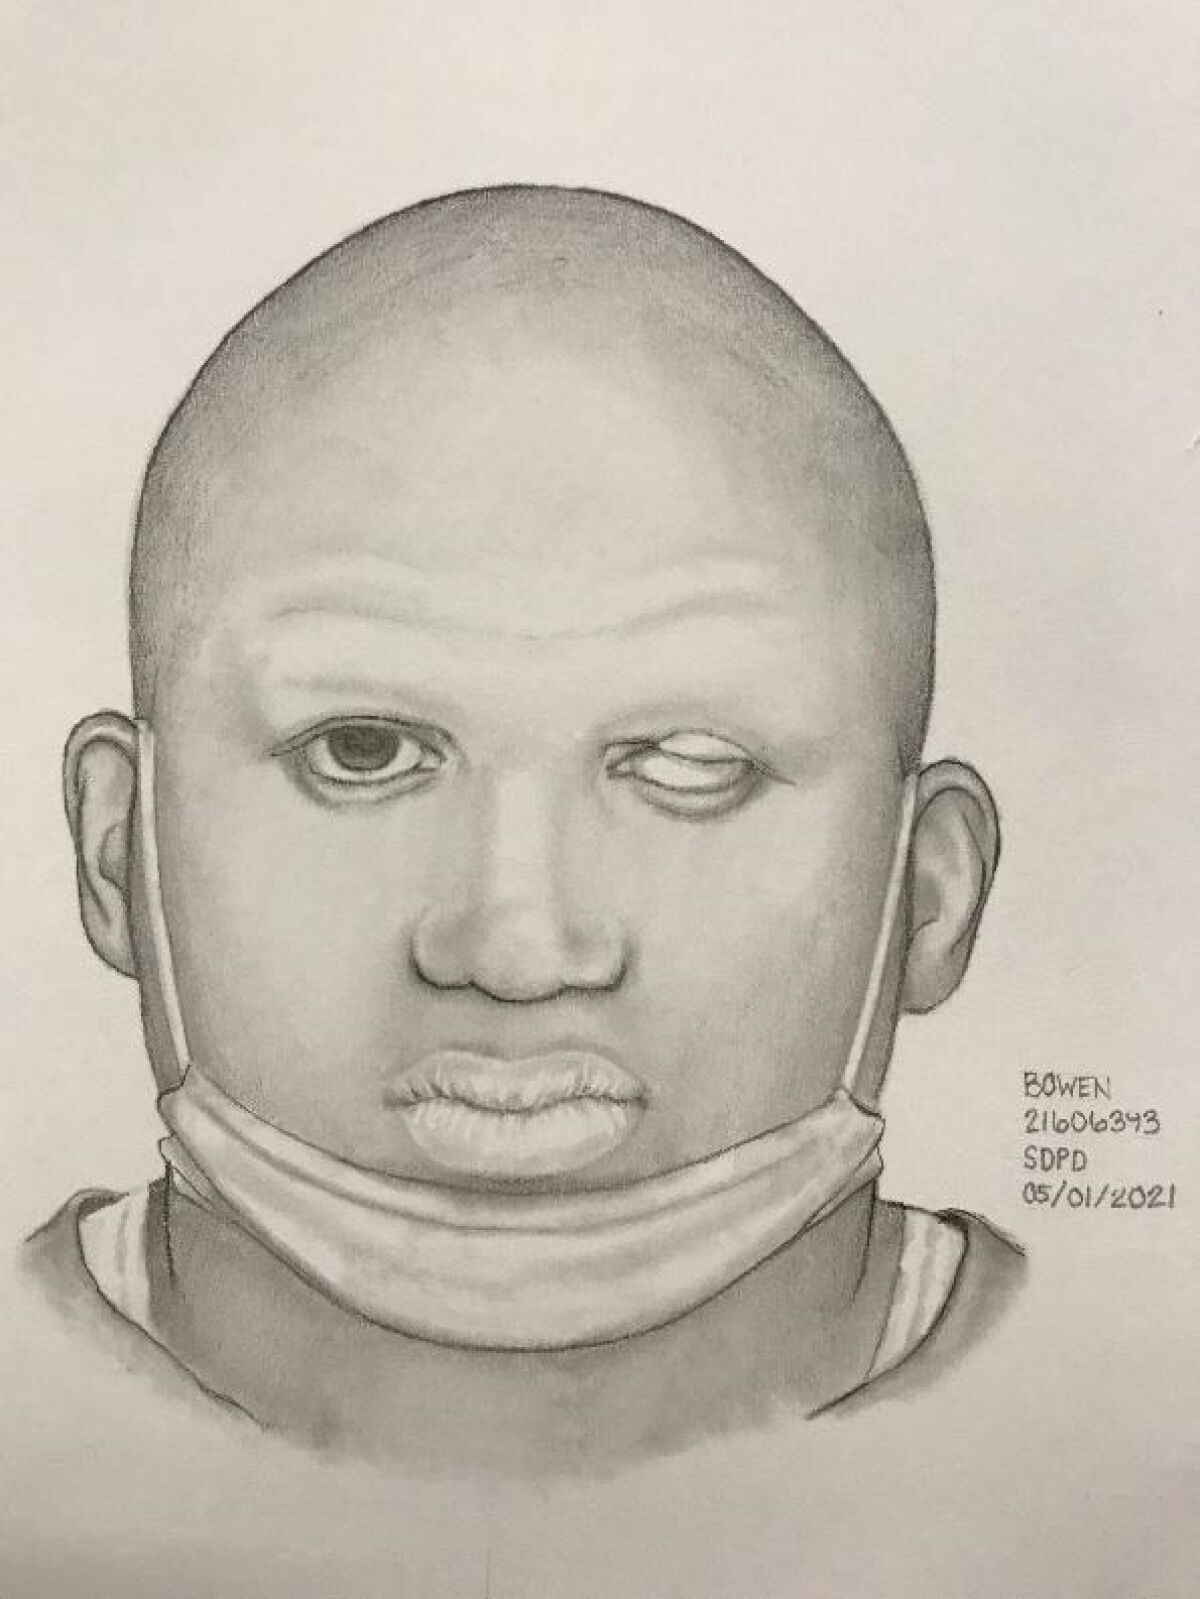 This sketch depicts a man suspected of sexually assaulting a 13-year-old girl April 28 near the Skyline neighborhood.